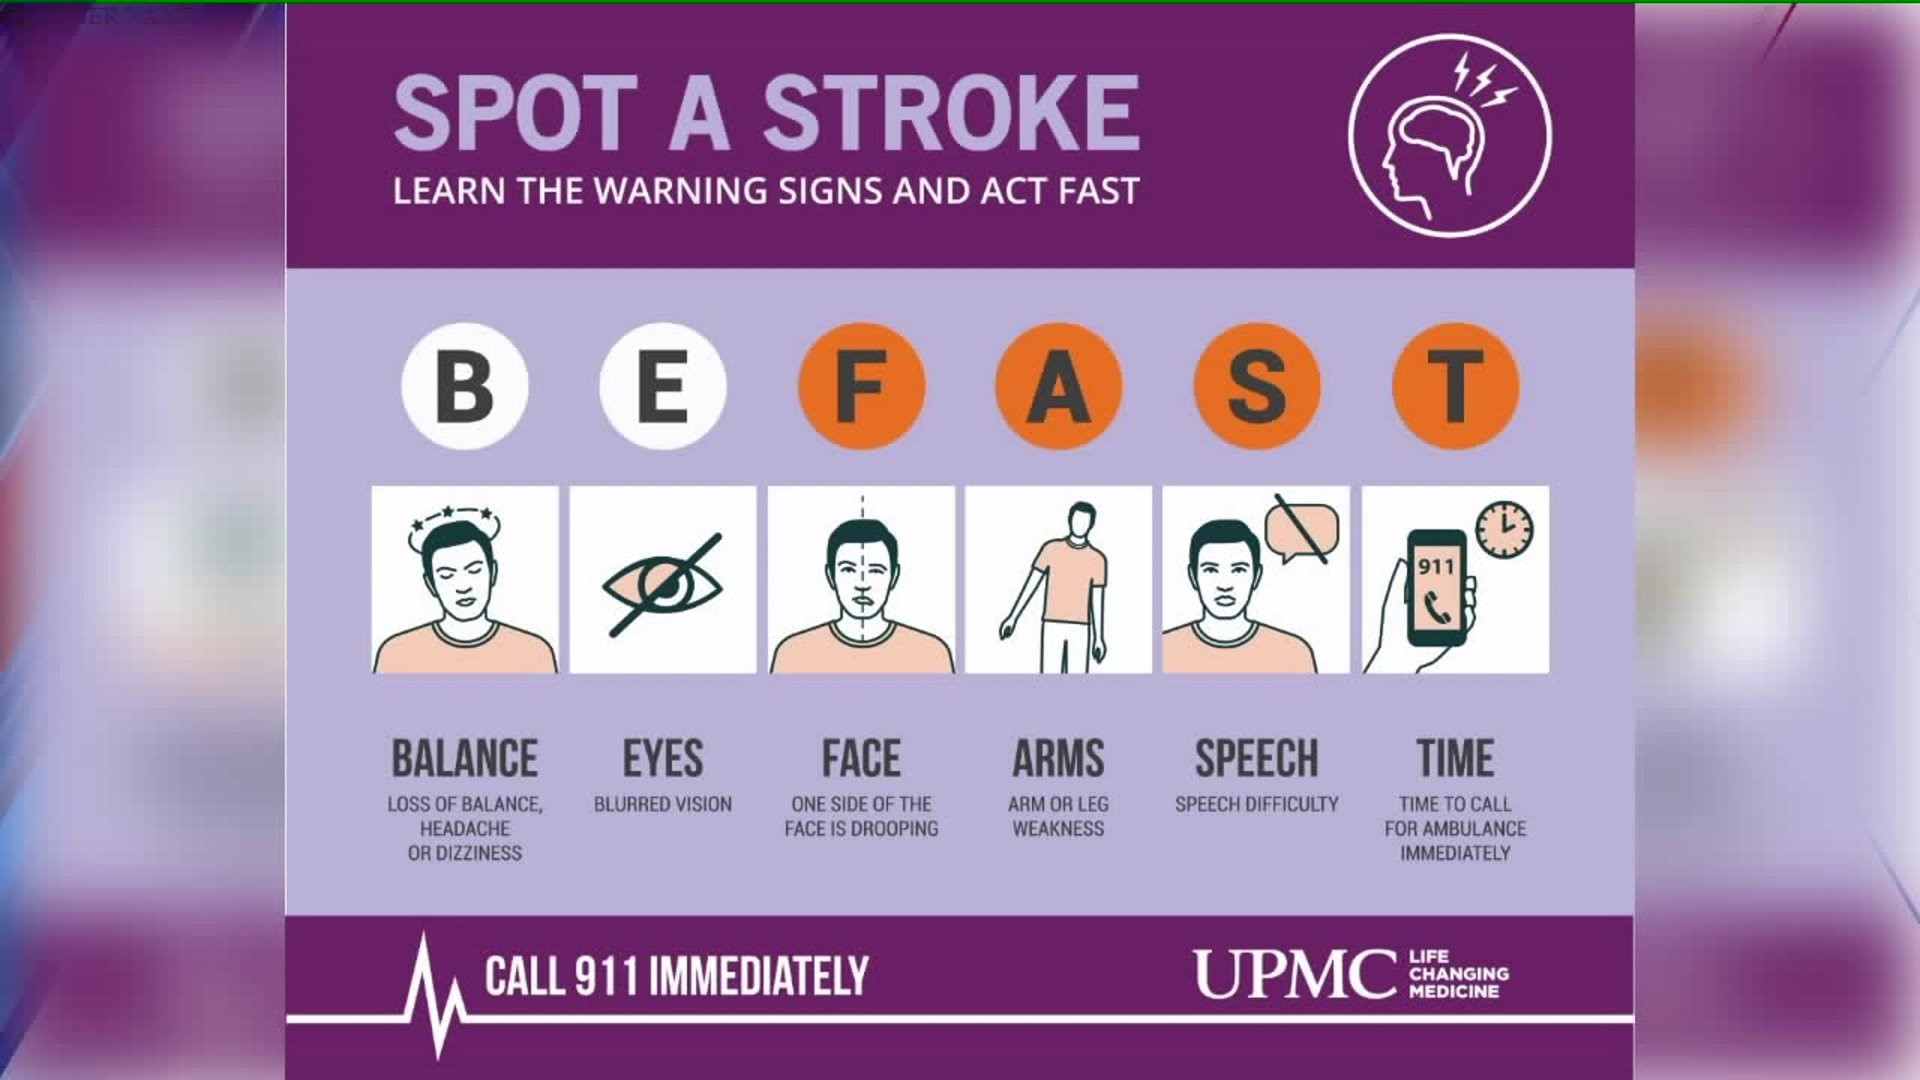 World Stroke Day: How to recognize signs of a stroke with Susquehanna Valley EMS